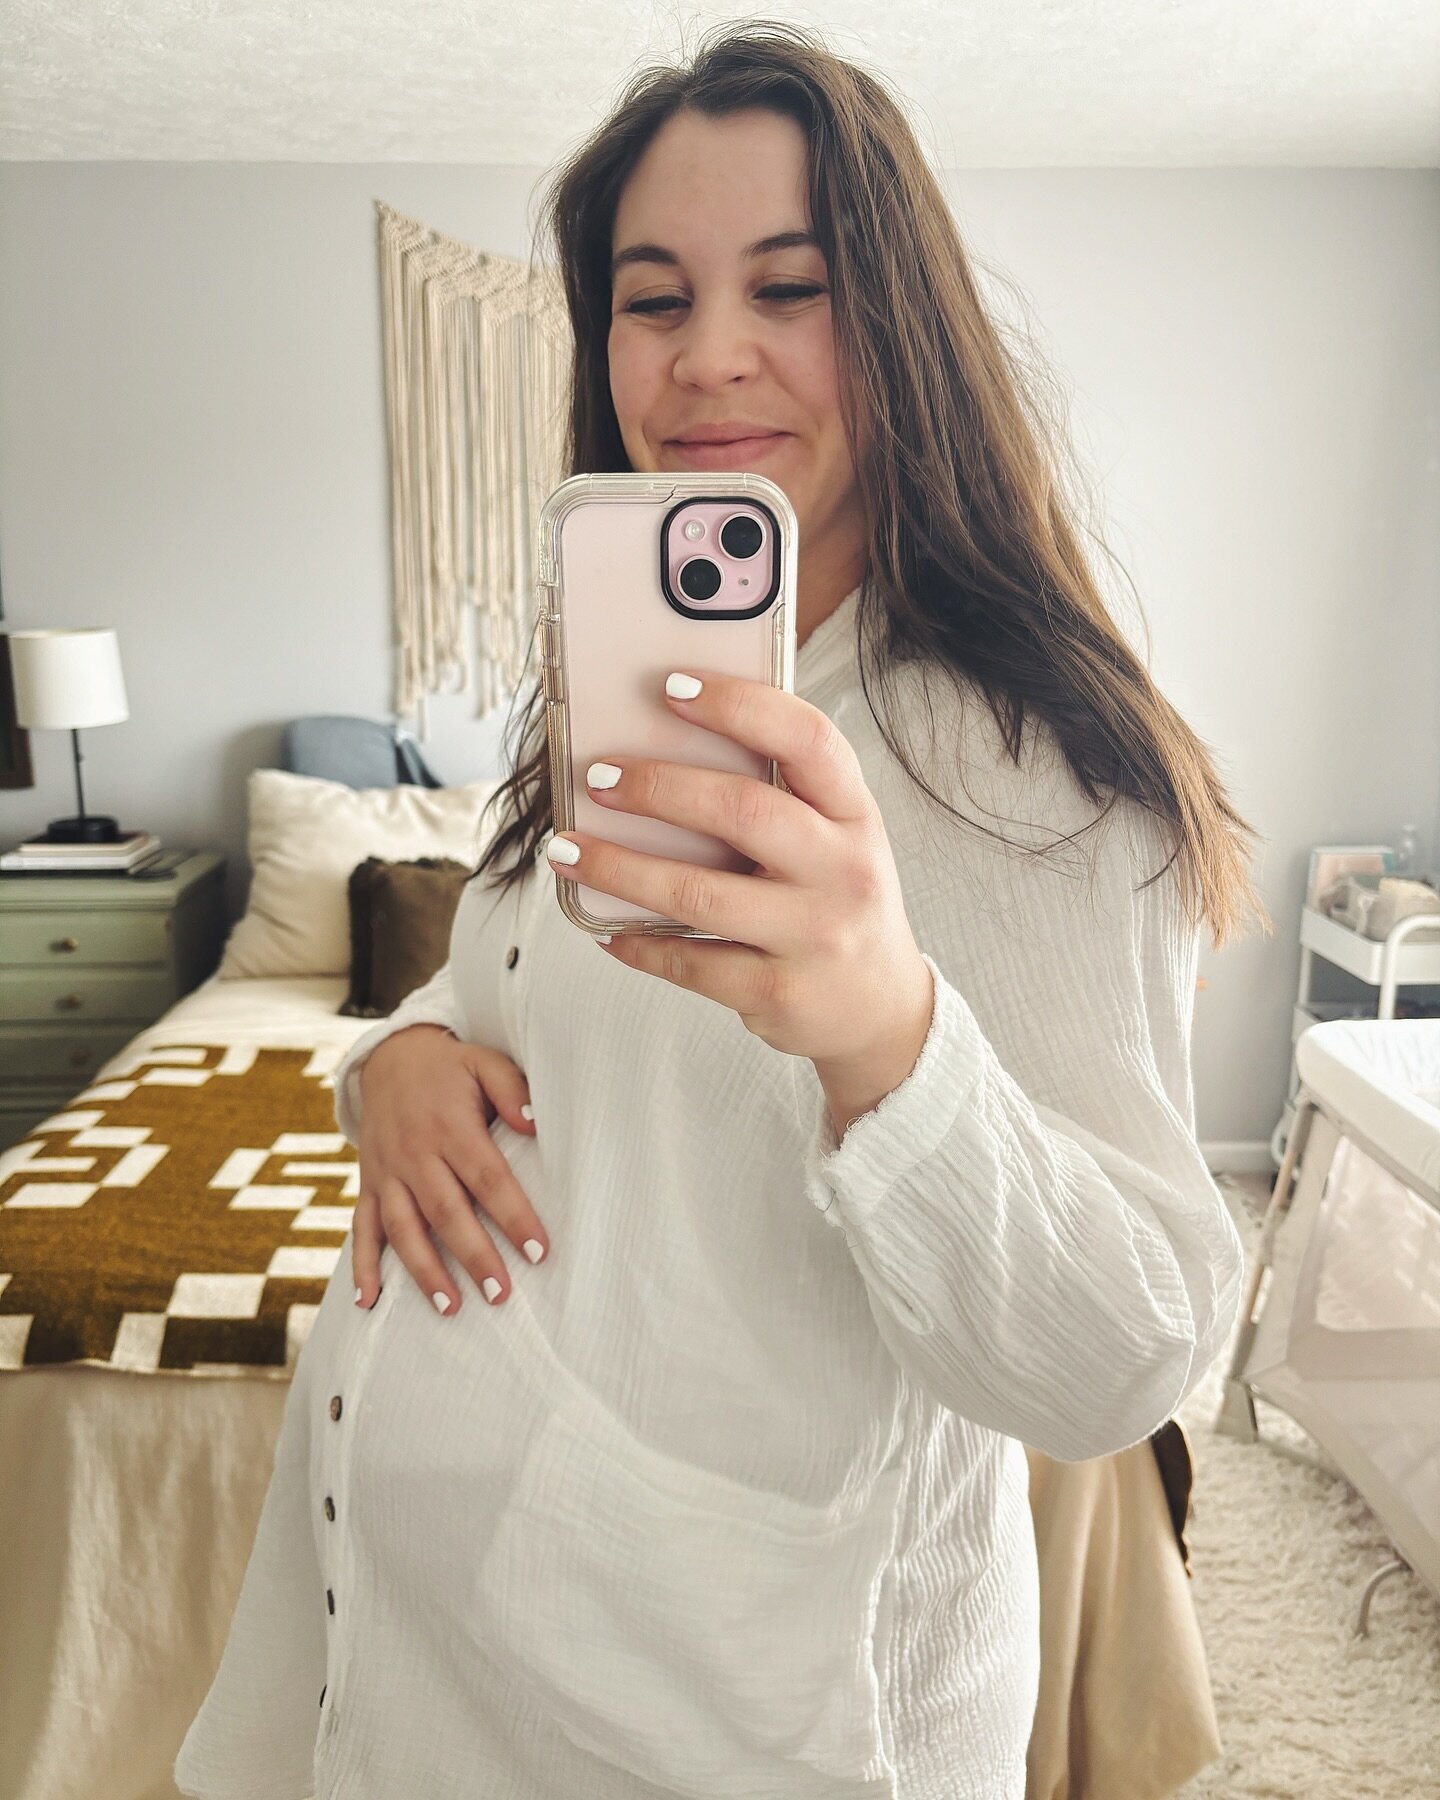 Let maternity leave commence 🪩💃🏽 I have no idea what the next few months will look like with running a small business and being a first time mama, so just going to take it slow, play it by ear, pray for discernment, and soak in ALL THE BABY SNUGGL